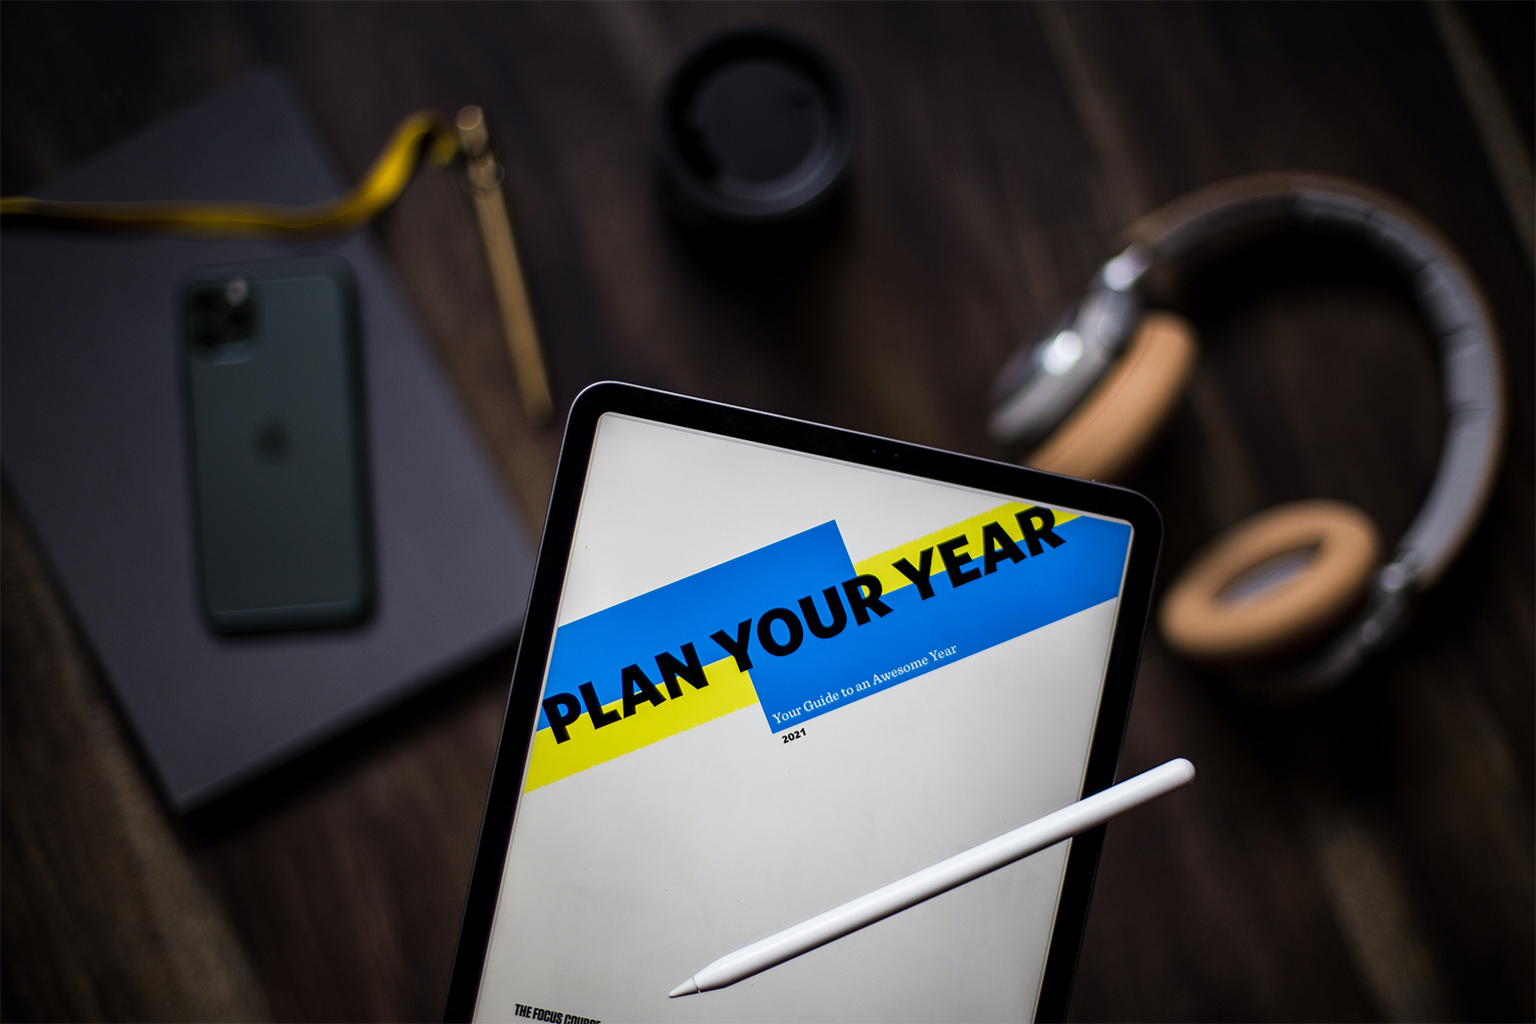 Plan your year 2021 on a tablet with a tablet pen in foreground; phone, laptop, travel mug, and headphones in background